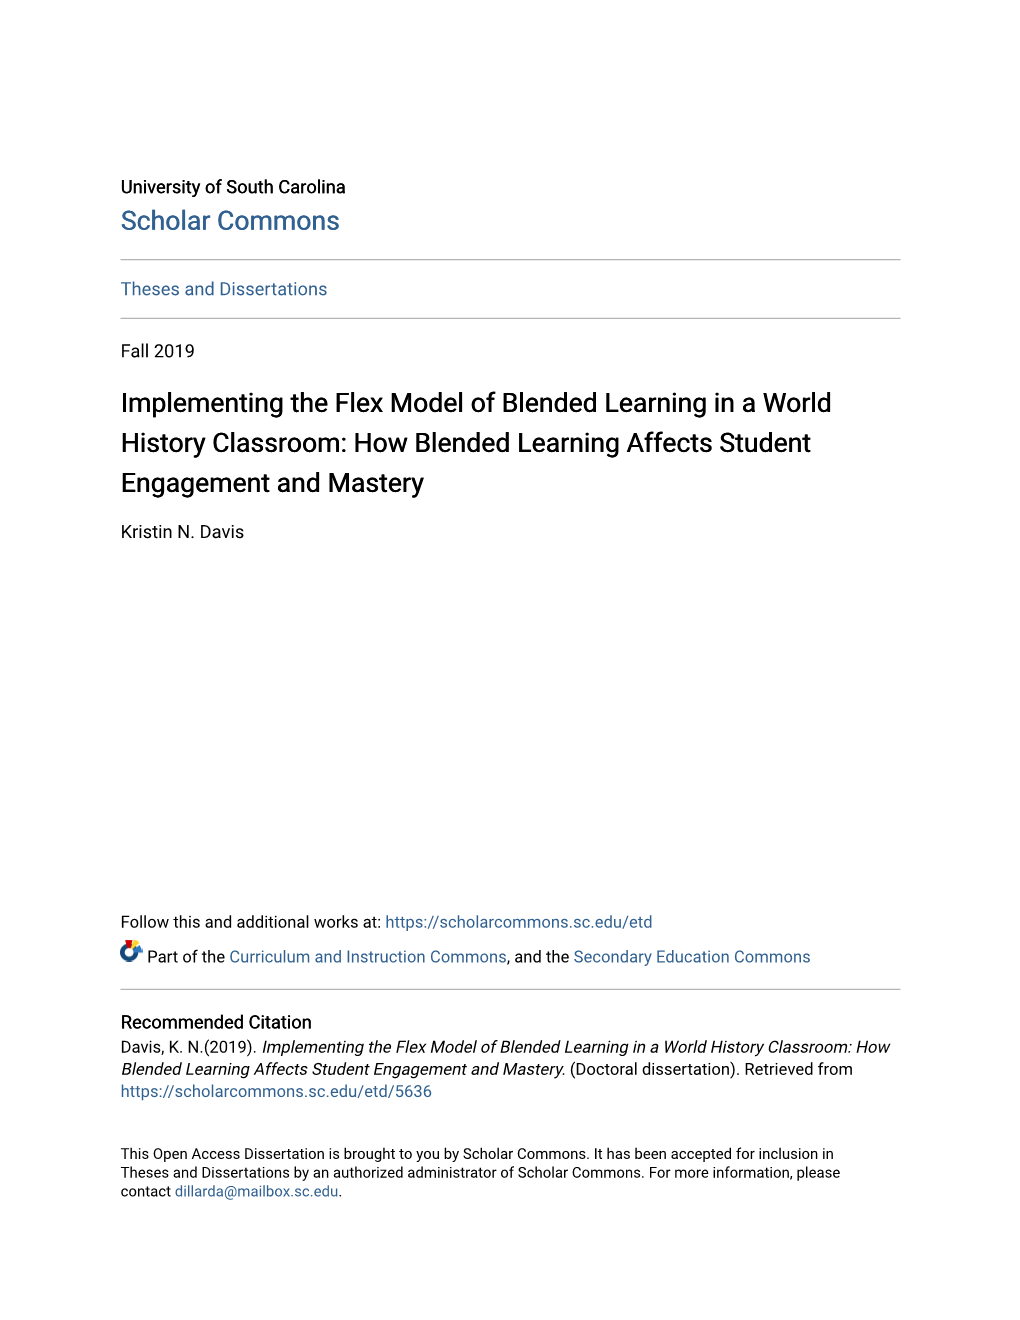 Implementing the Flex Model of Blended Learning in a World History Classroom: How Blended Learning Affects Student Engagement and Mastery